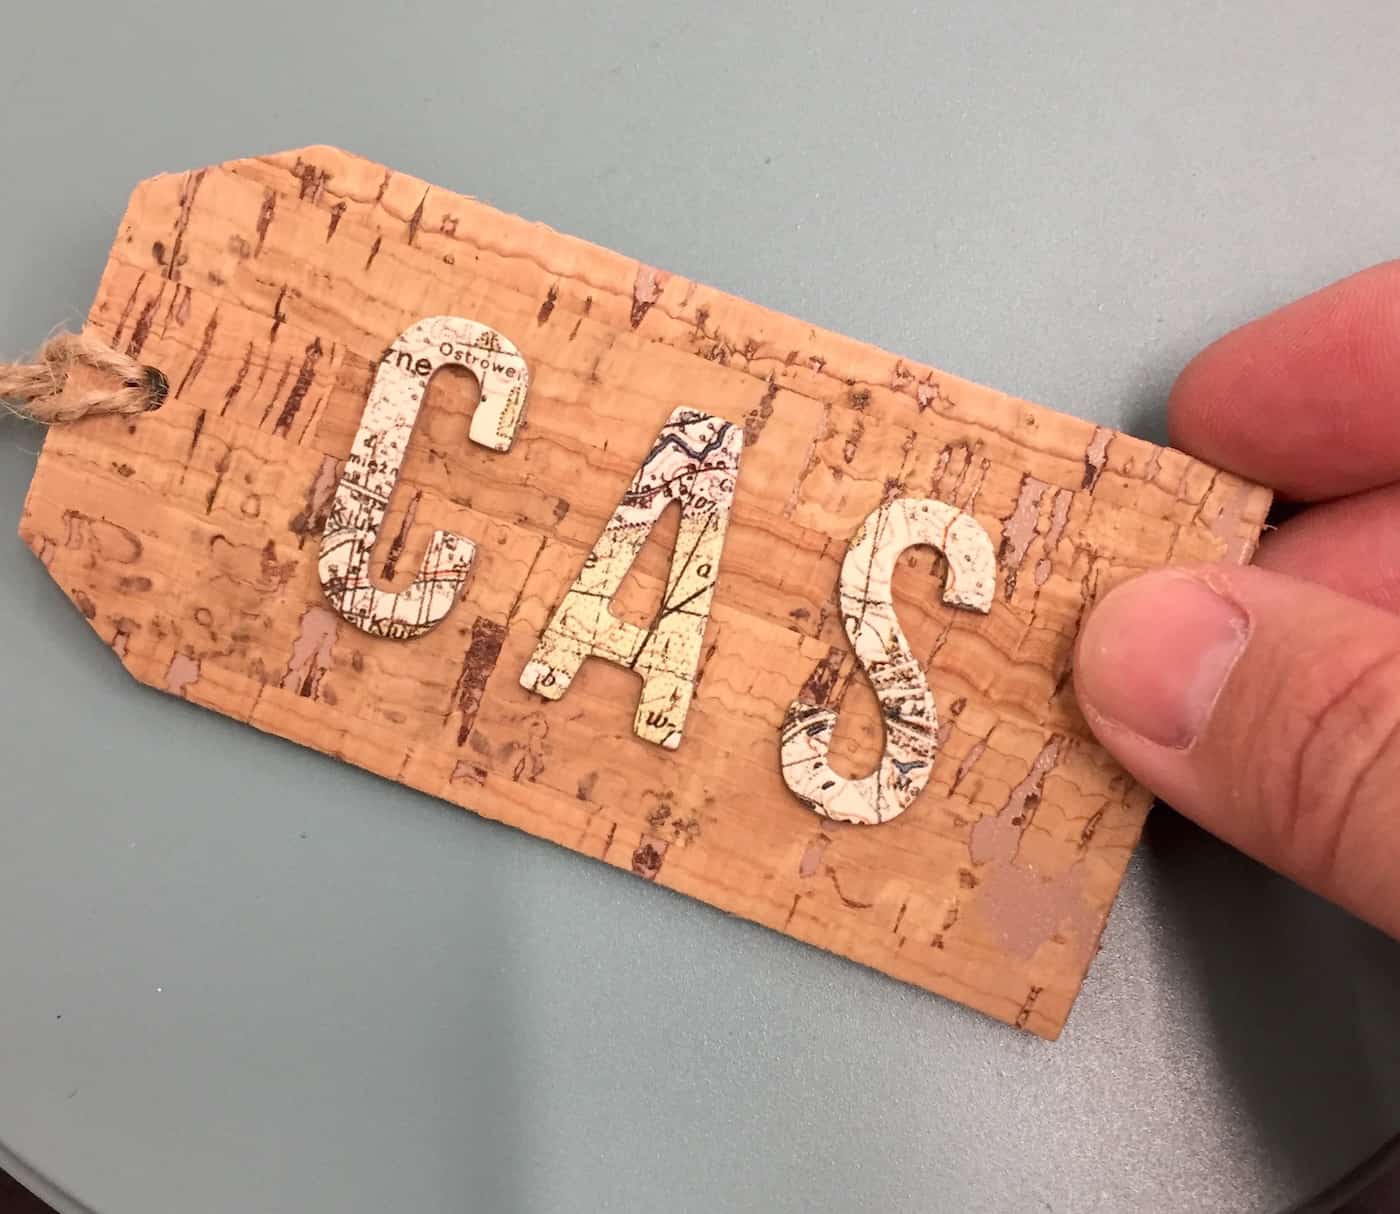 Cork gift tag with the initials "CAS" on top